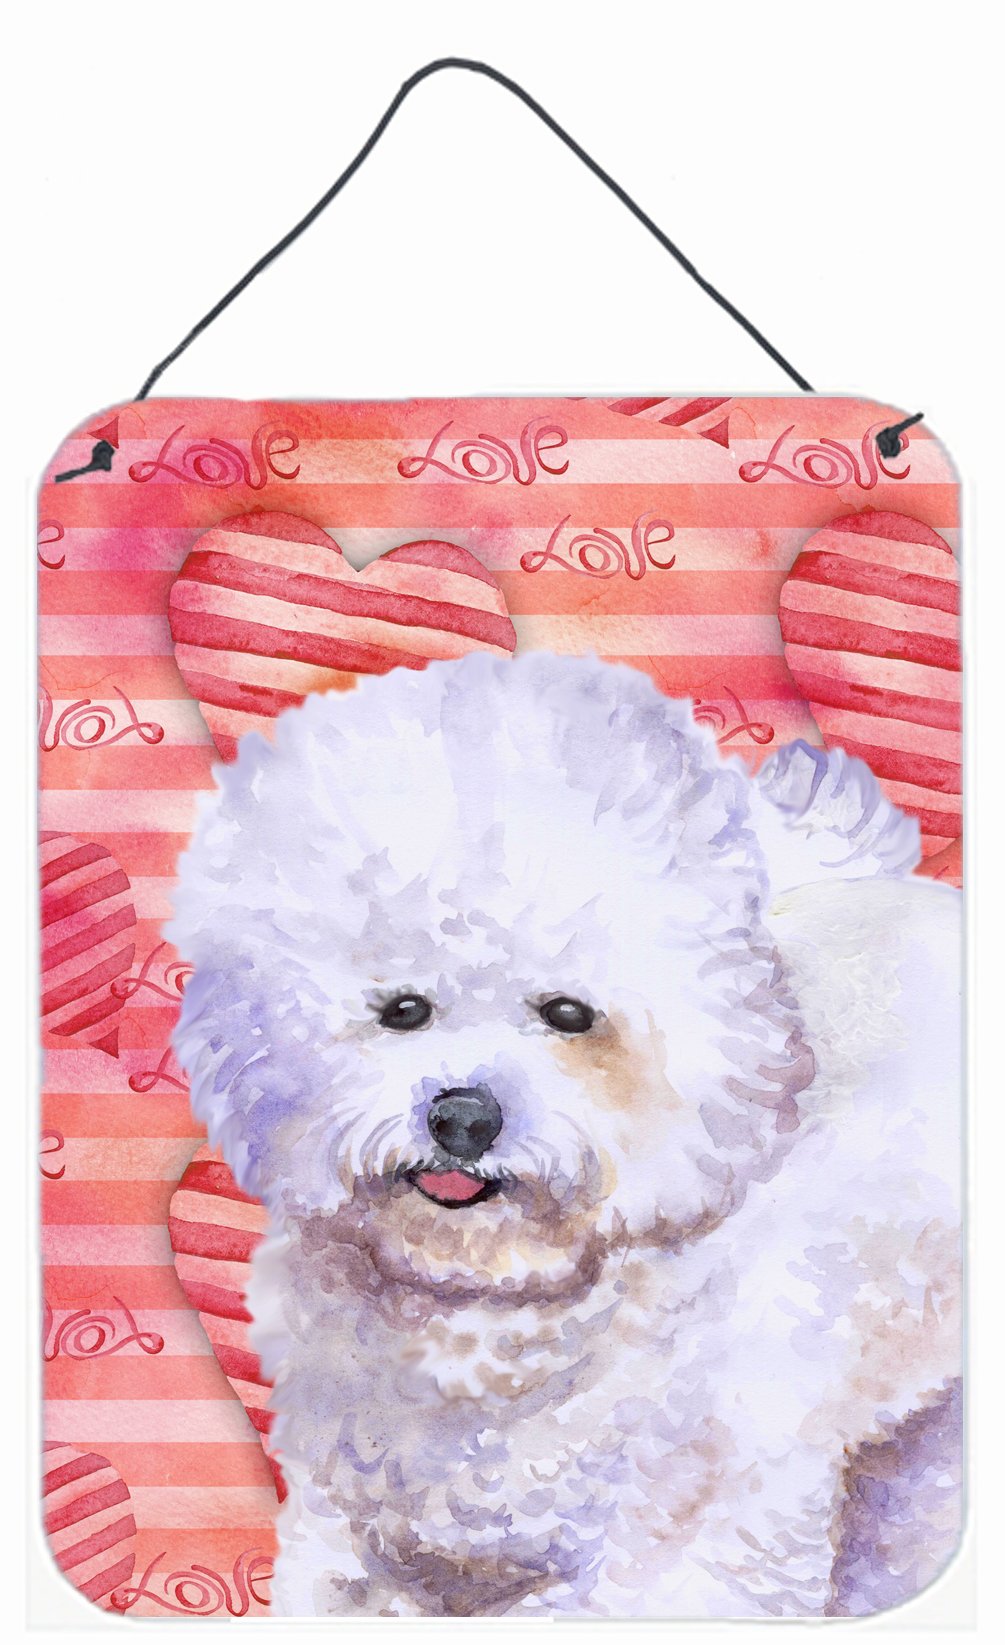 Bichon Frise Love Wall or Door Hanging Prints BB9735DS1216 by Caroline's Treasures